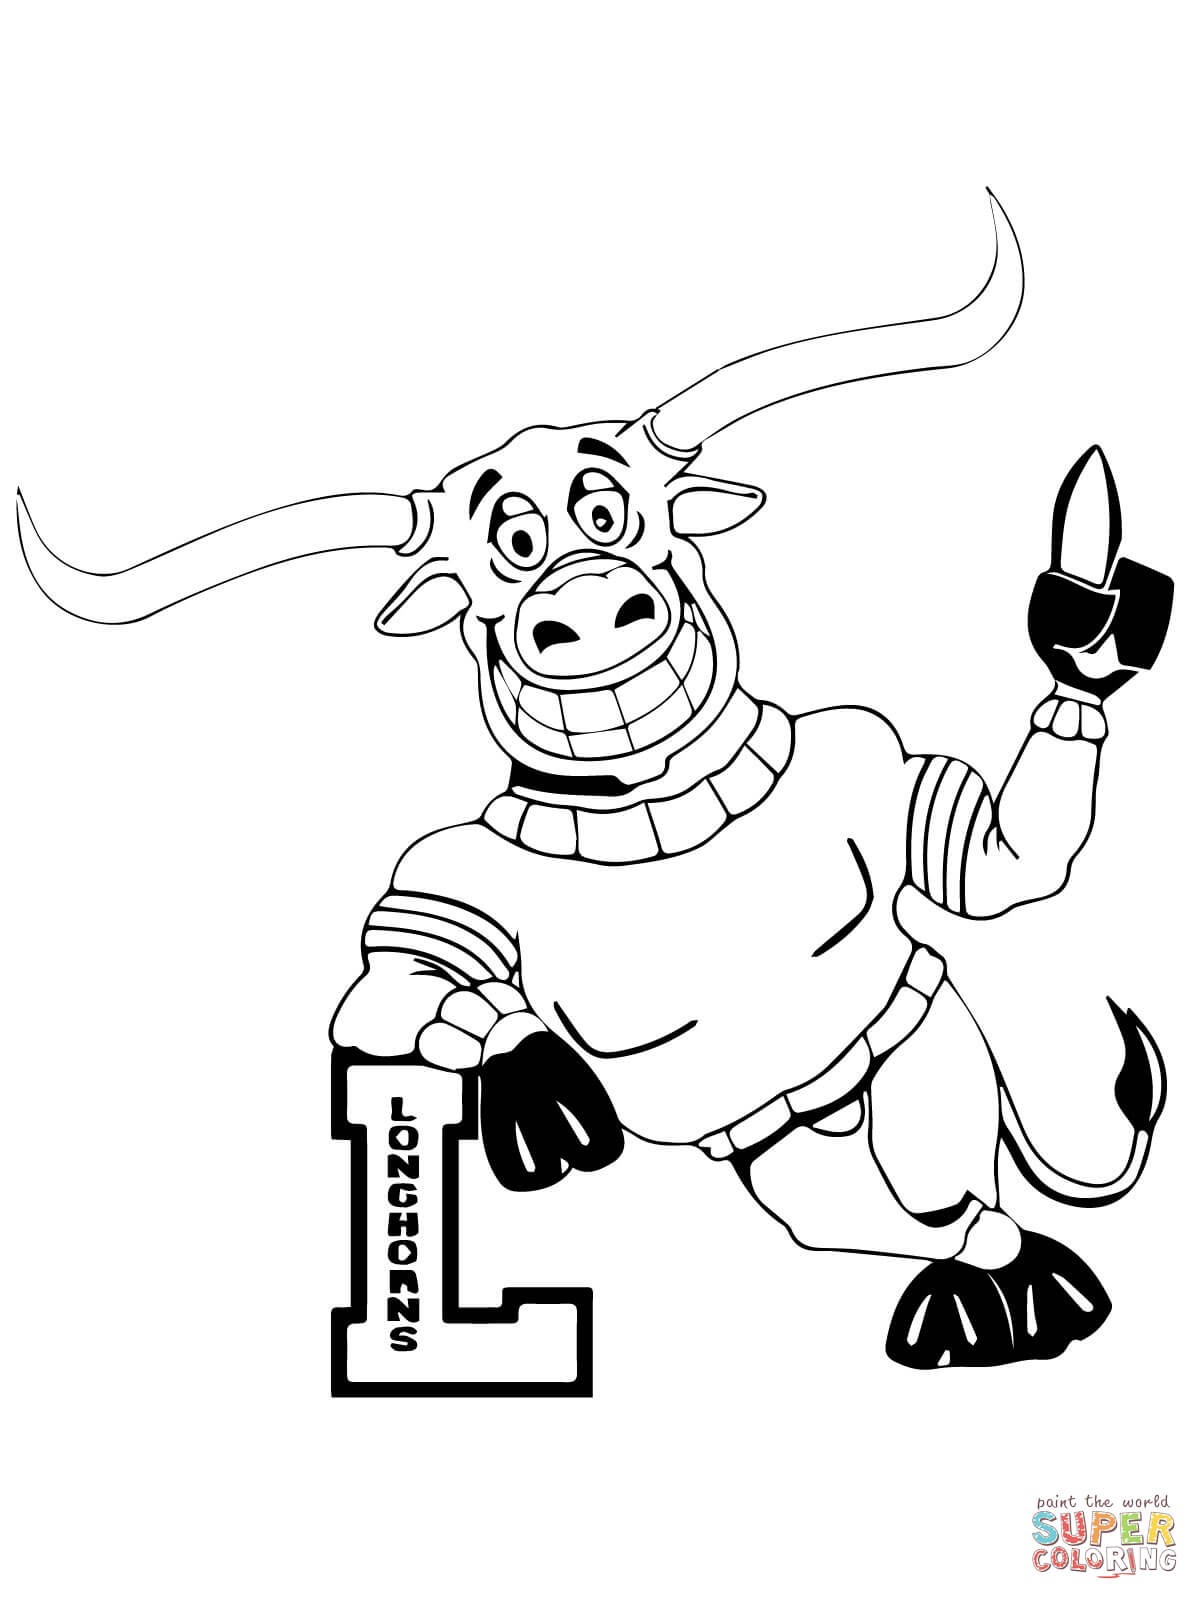 Texas Longhorns Coloring Sheet Coloring Pages